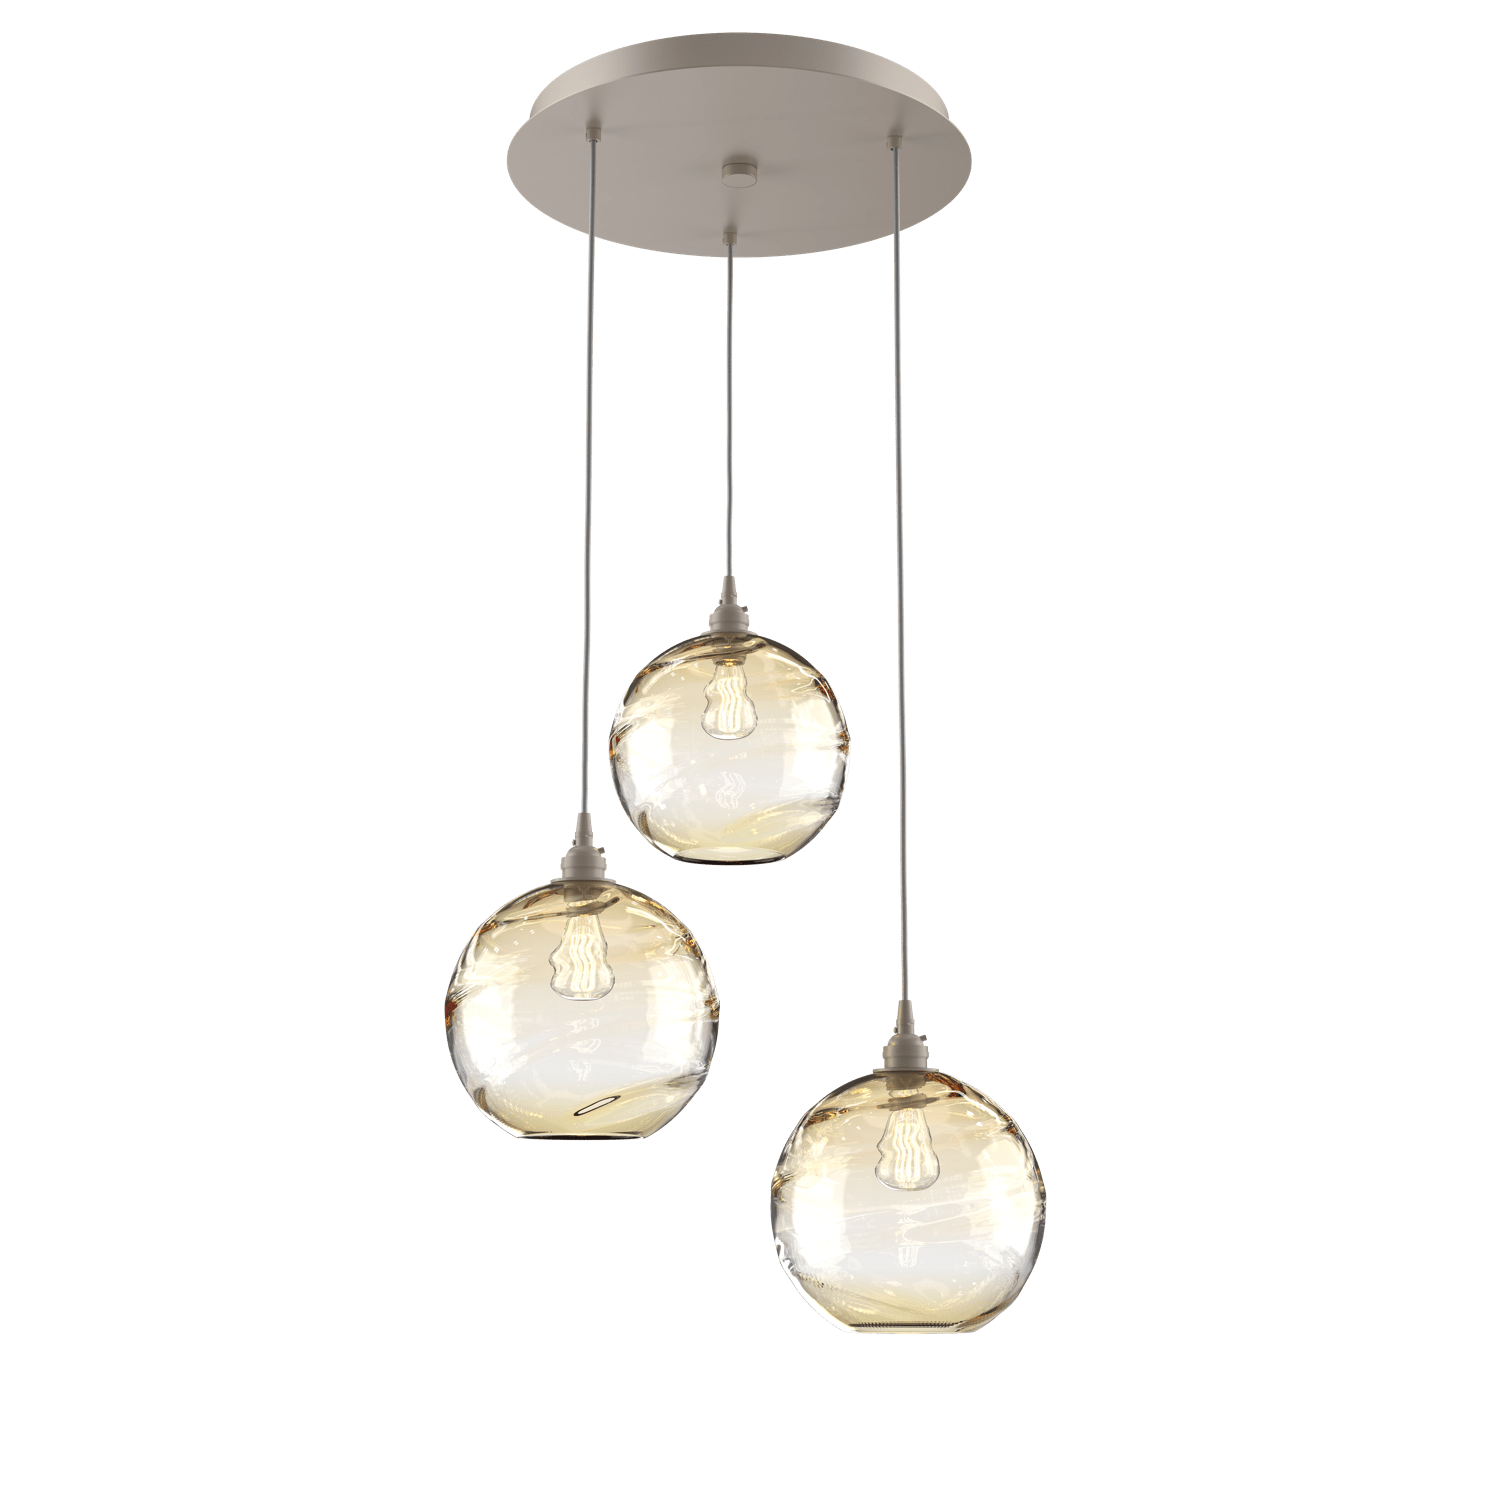 CHB0047-03-BS-OA-Hammerton-Studio-Optic-Blown-Glass-Terra-3-light-round-pendant-chandelier-with-metallic-beige-silver-finish-and-optic-amber-blown-glass-shades-and-incandescent-lamping